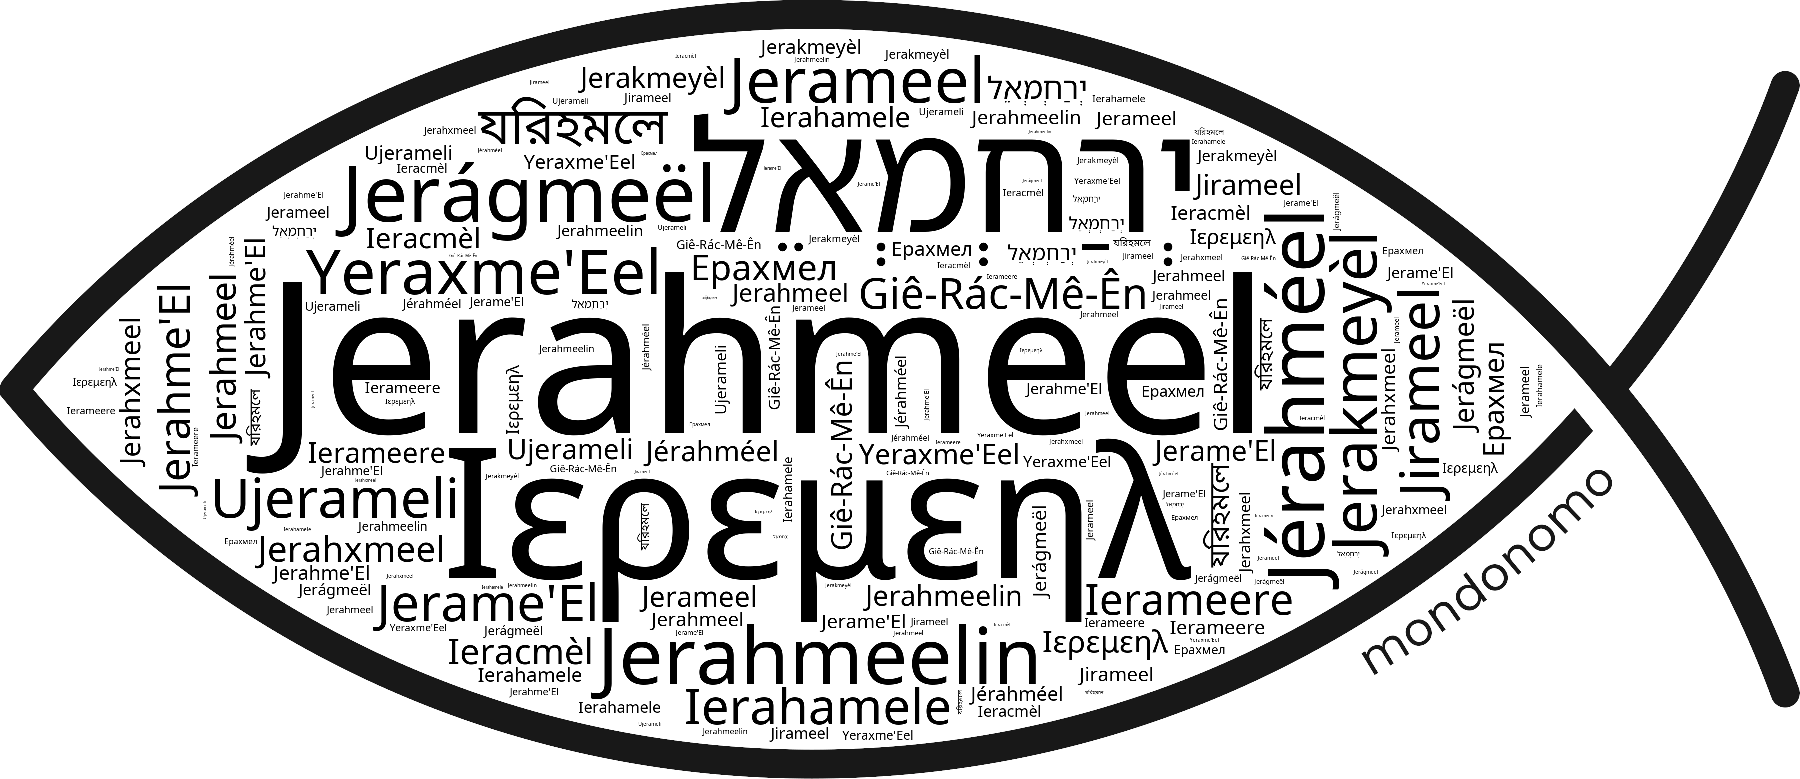 Name Jerahmeel in the world's Bibles